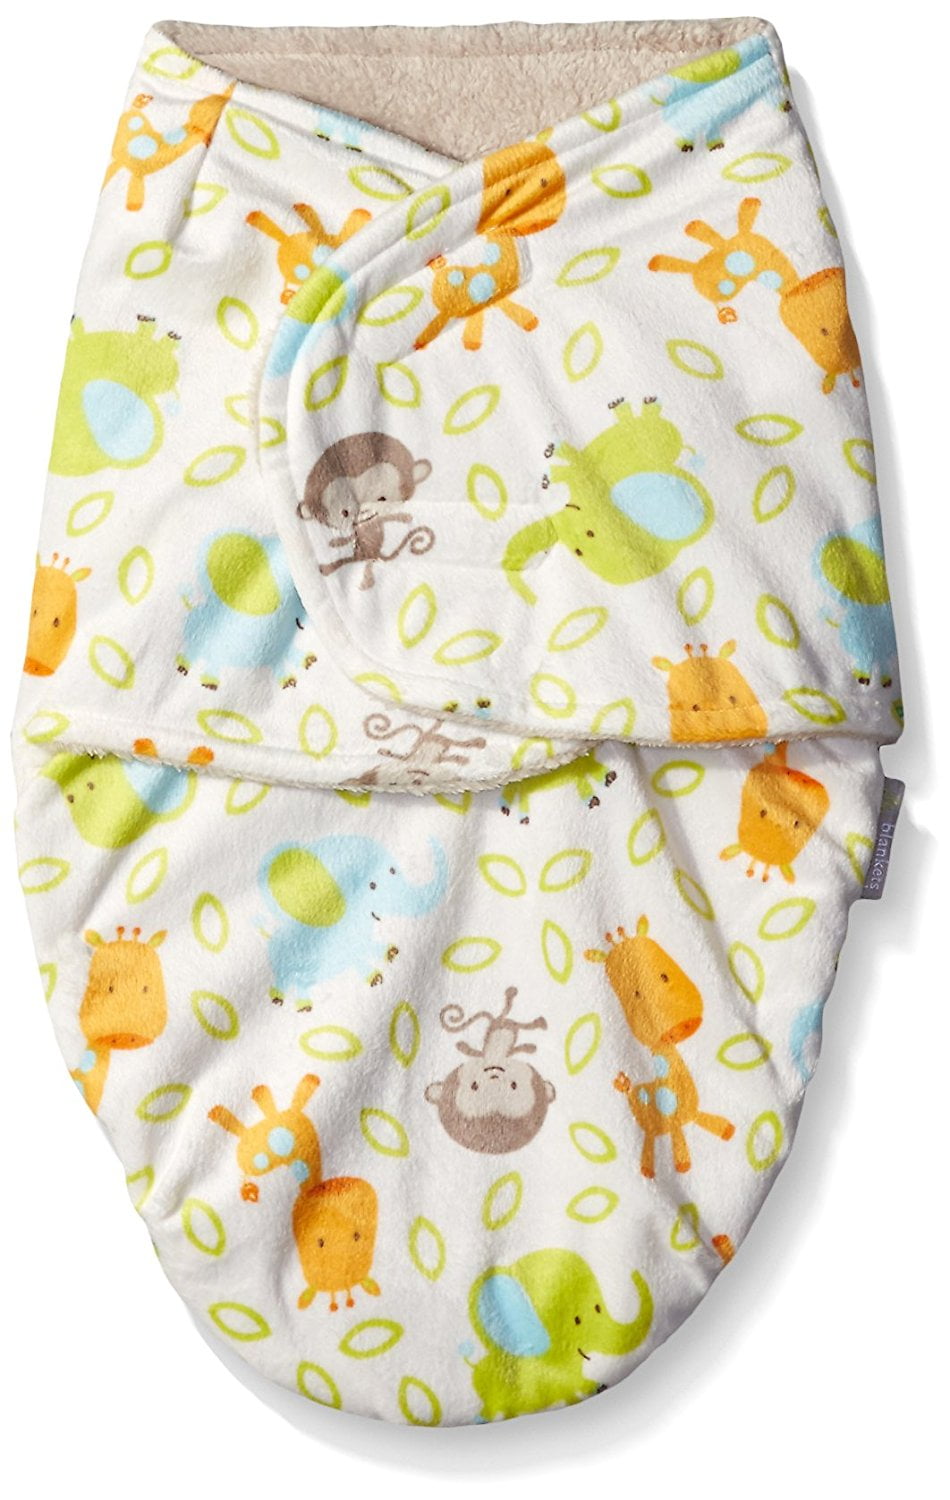 Babys Safari Animal Print Swaddle Bag By Multicolor Animals By